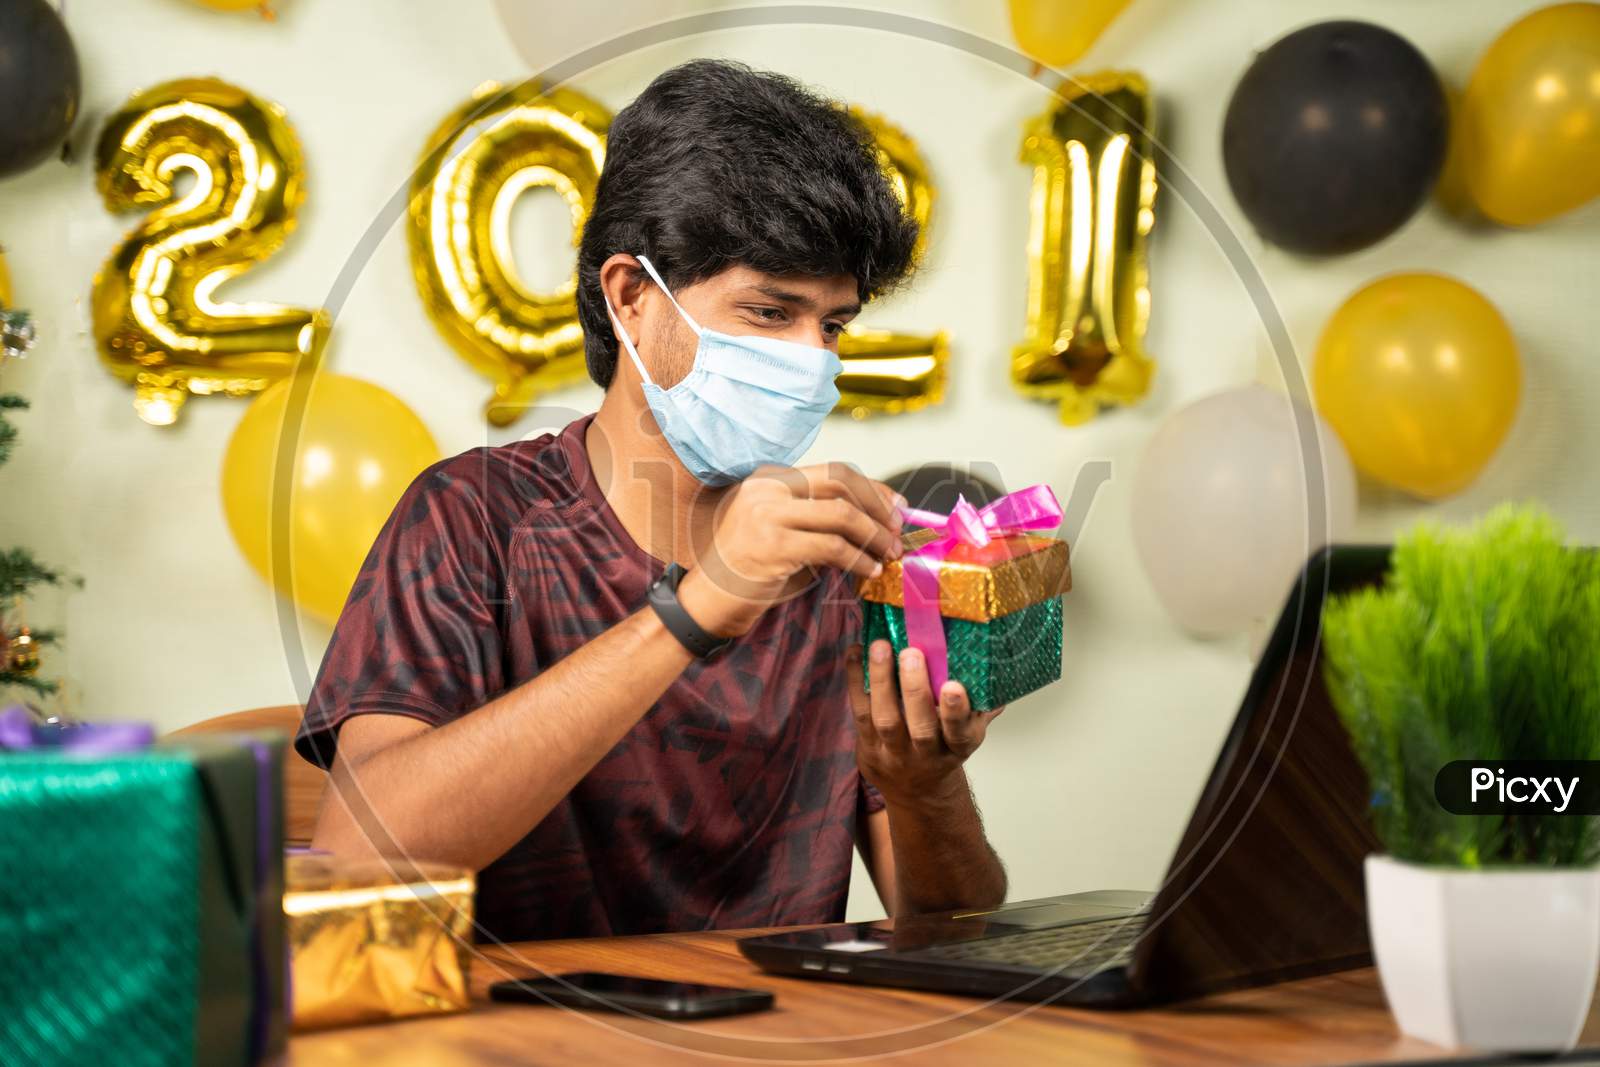 Young Man With Medical Mask Opening Gift Box Over Video Call On Laptop With 2021 New Year Decorated Background - Concept Of Distant Xmas Or Holiday Celebration Due To Covid-19 Or Coronavirus Pandemic.